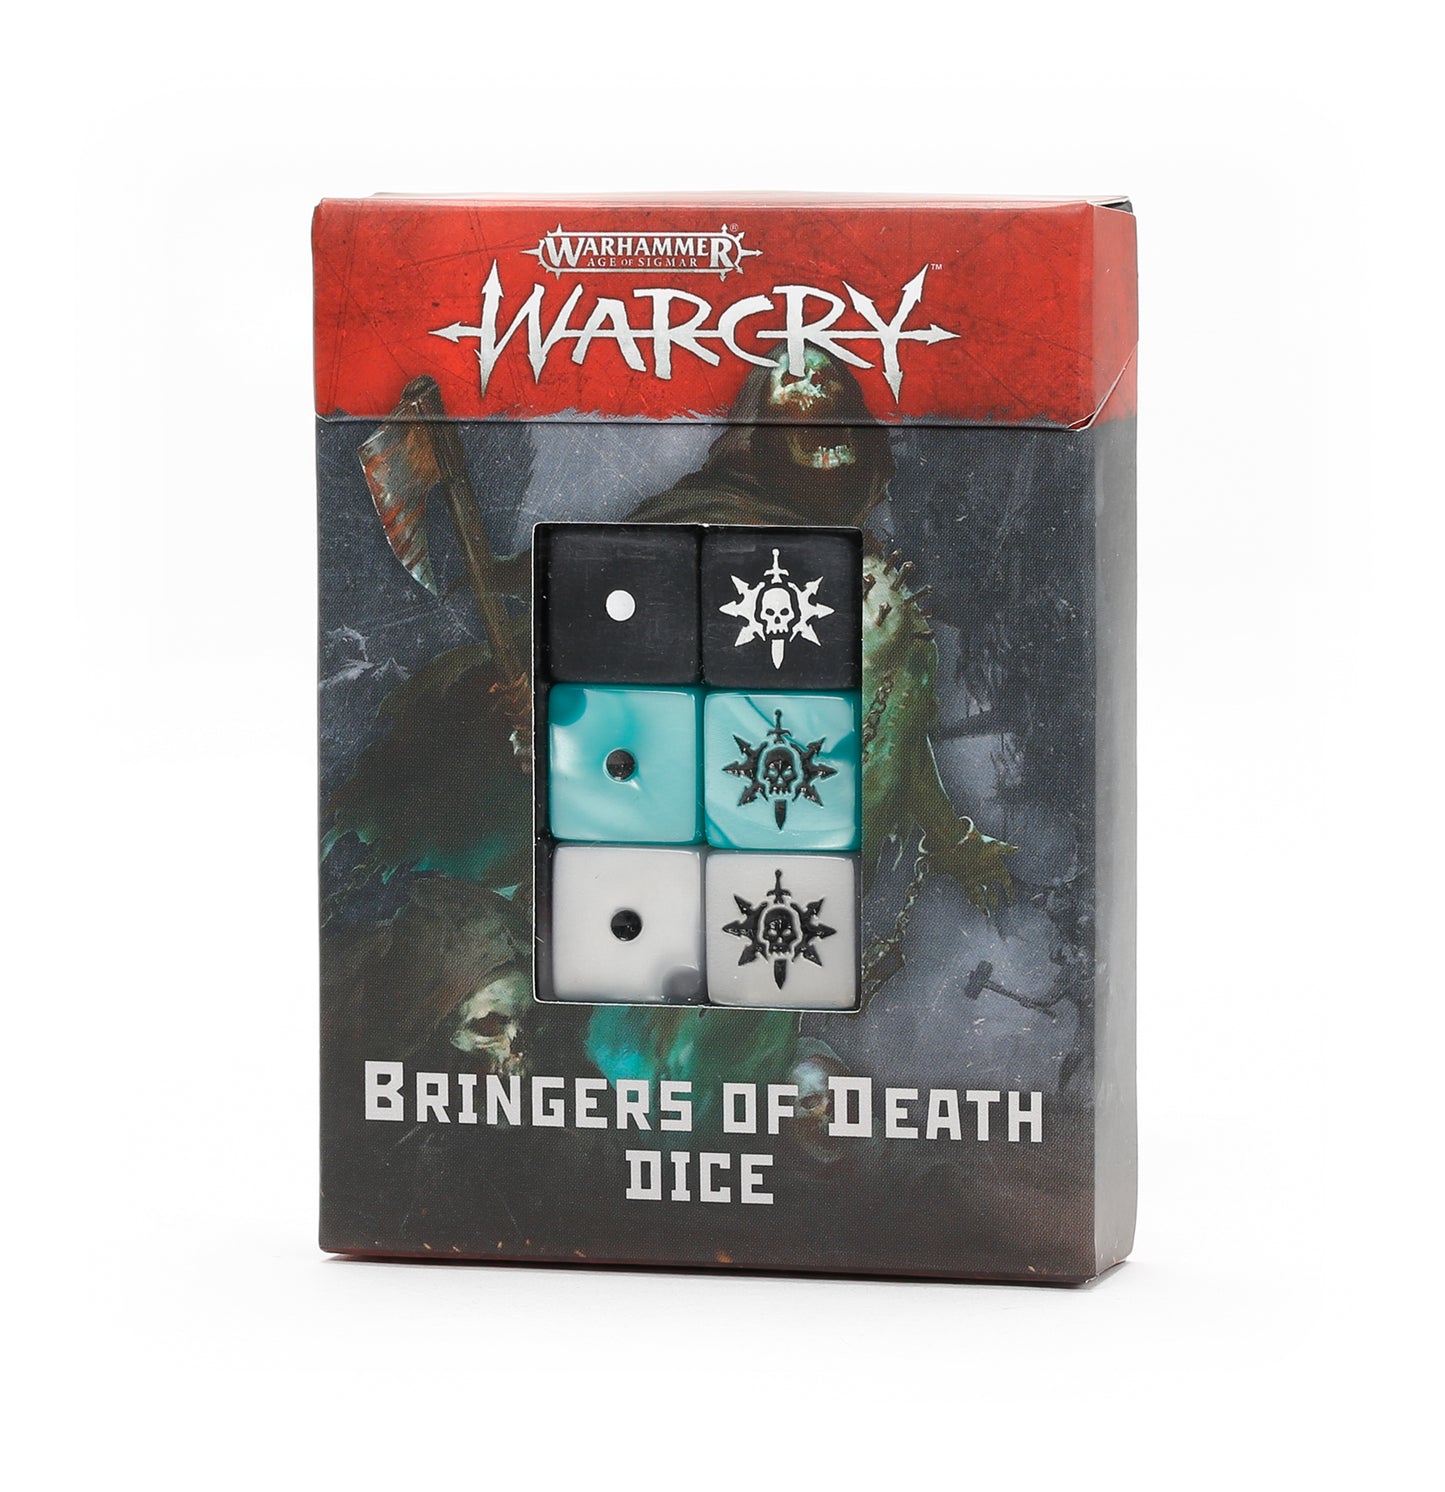 WARCRY BRINGERS OF DEATH DICE